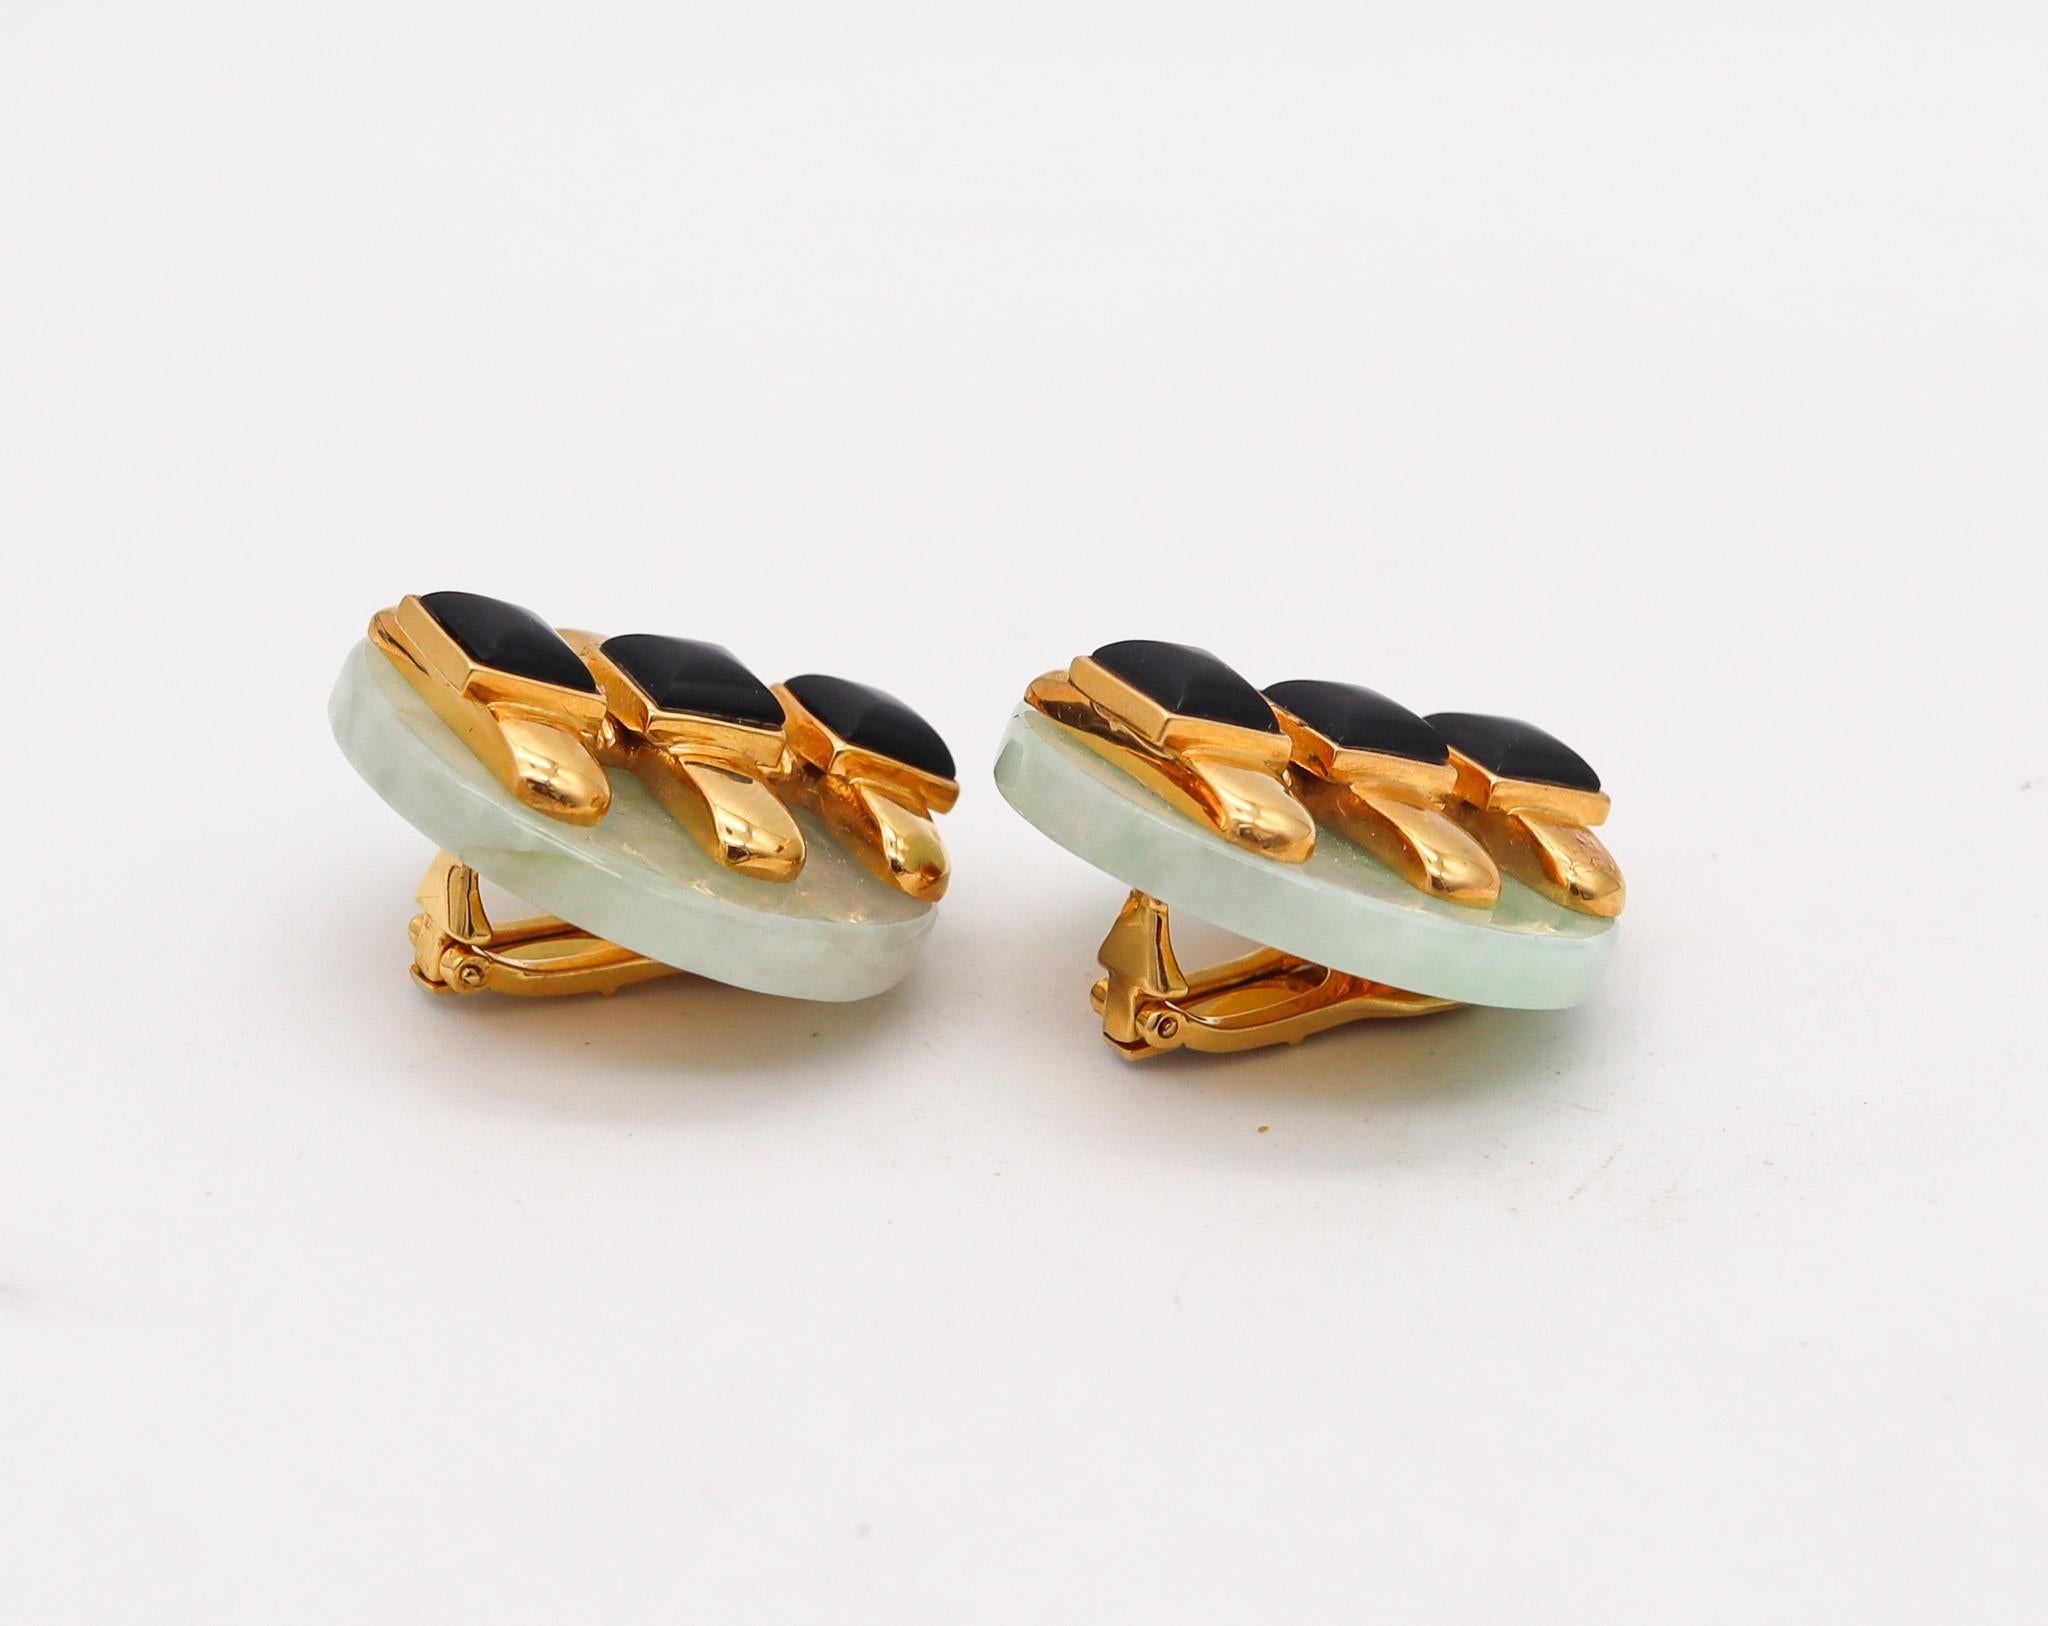 Pair of ear-clips designed by Aldo Cipullo (1936-1984) for Cartier.

Exceptional pair of sculptural ear-clips made in New York city by the jewelry designer Aldo Cipullo. This rare geometric earrings was created during the collaboration period with